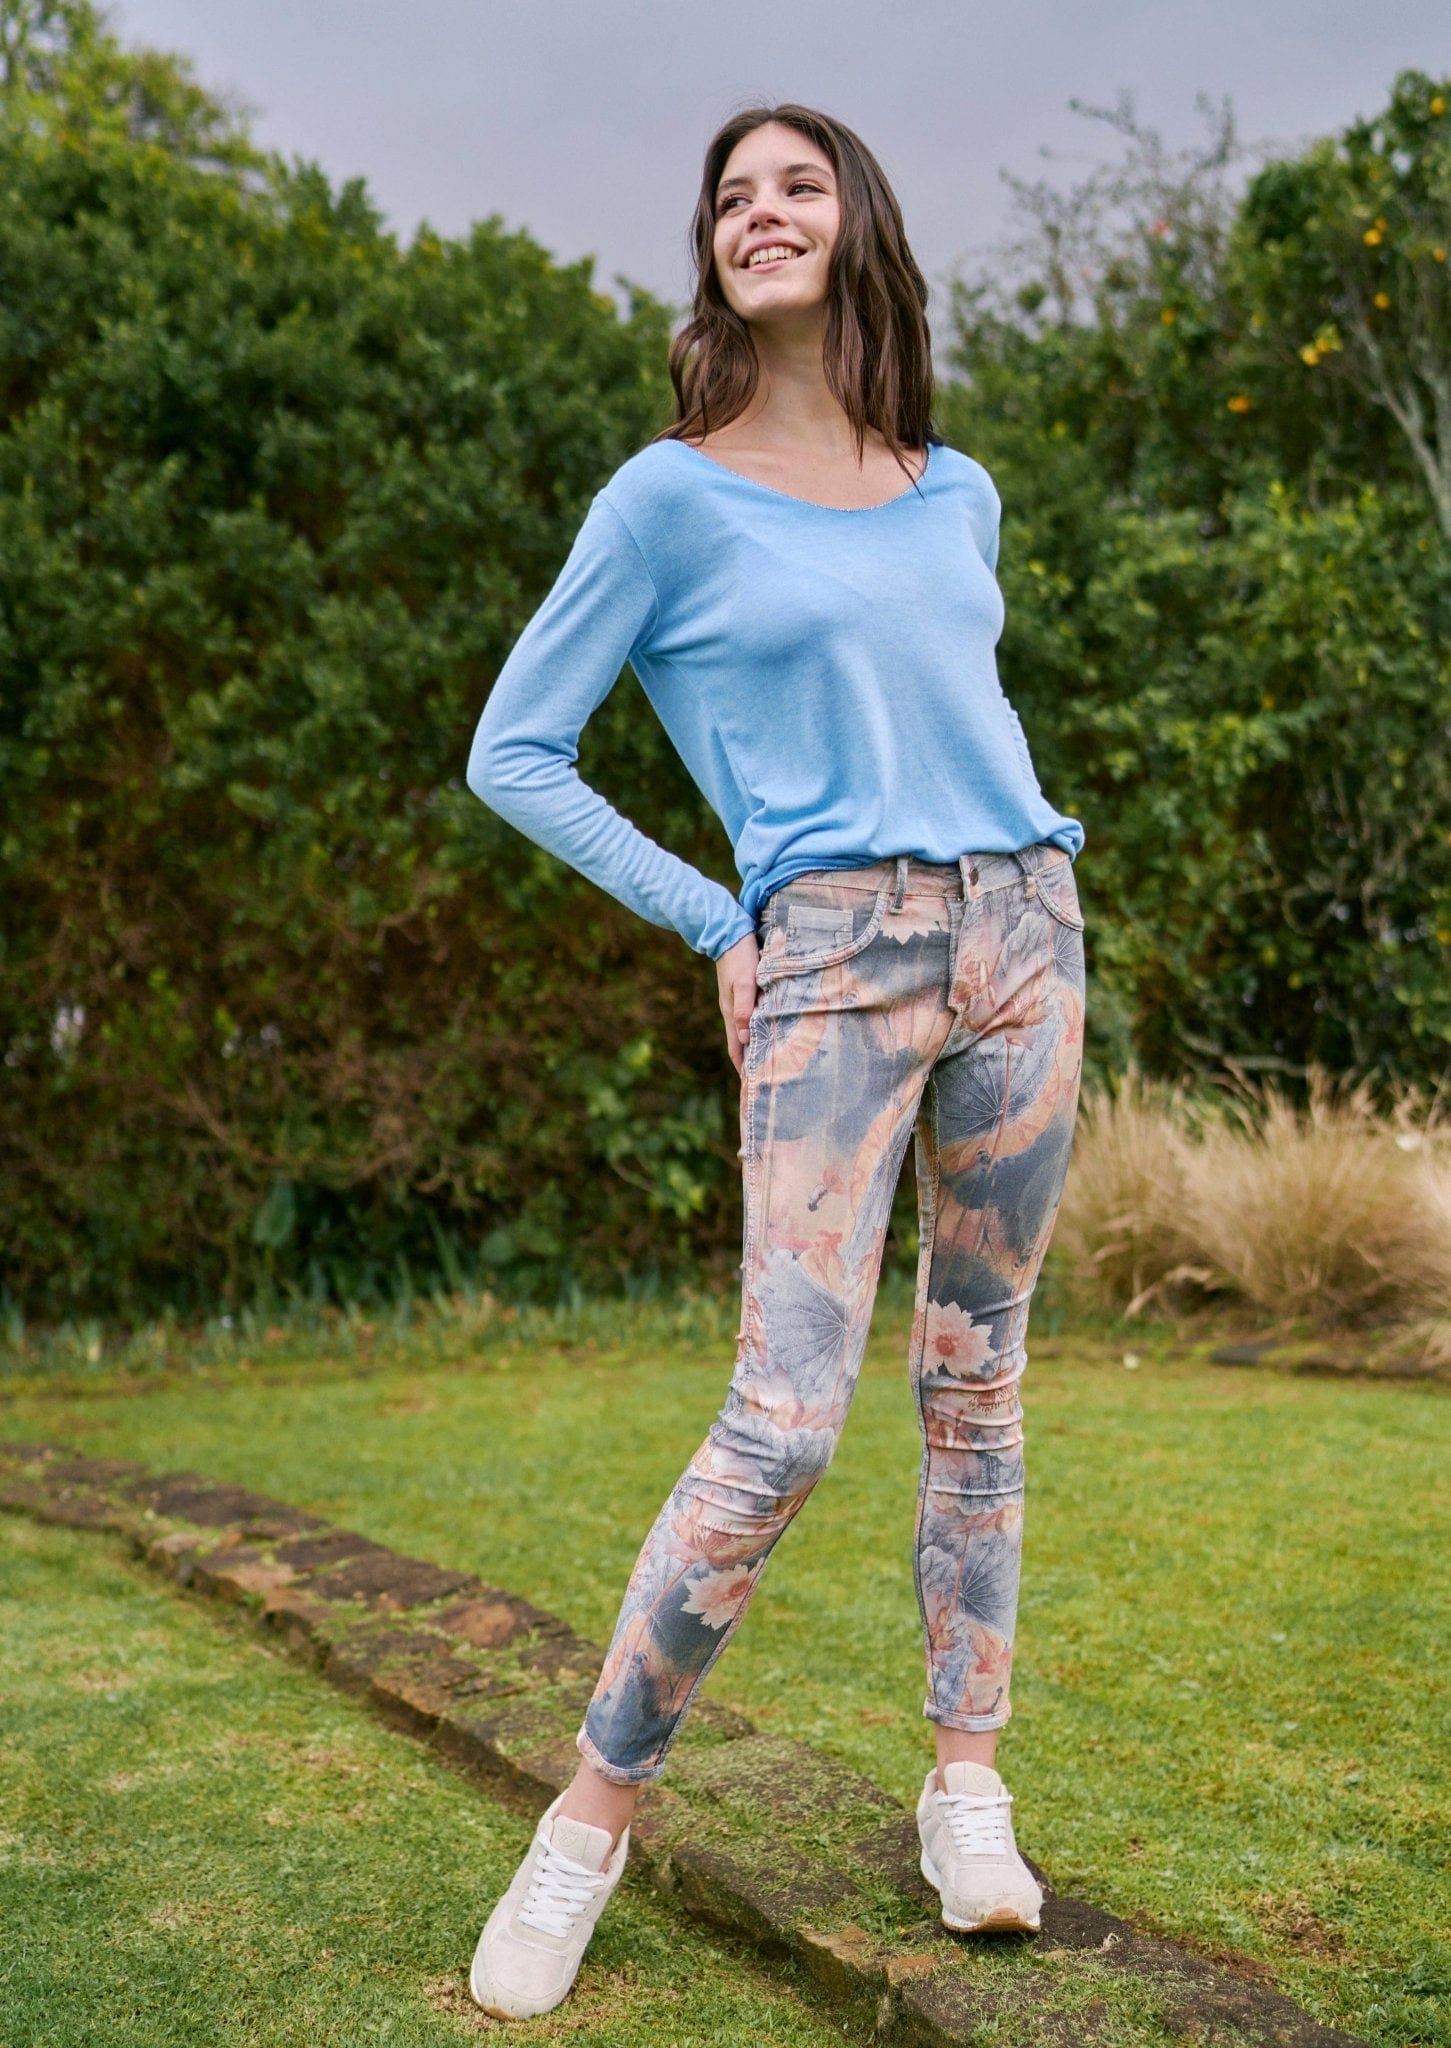 Airbrushed Floral Reversible Print Jeans in Light Taupe - Tribute StoreTRIBUTE